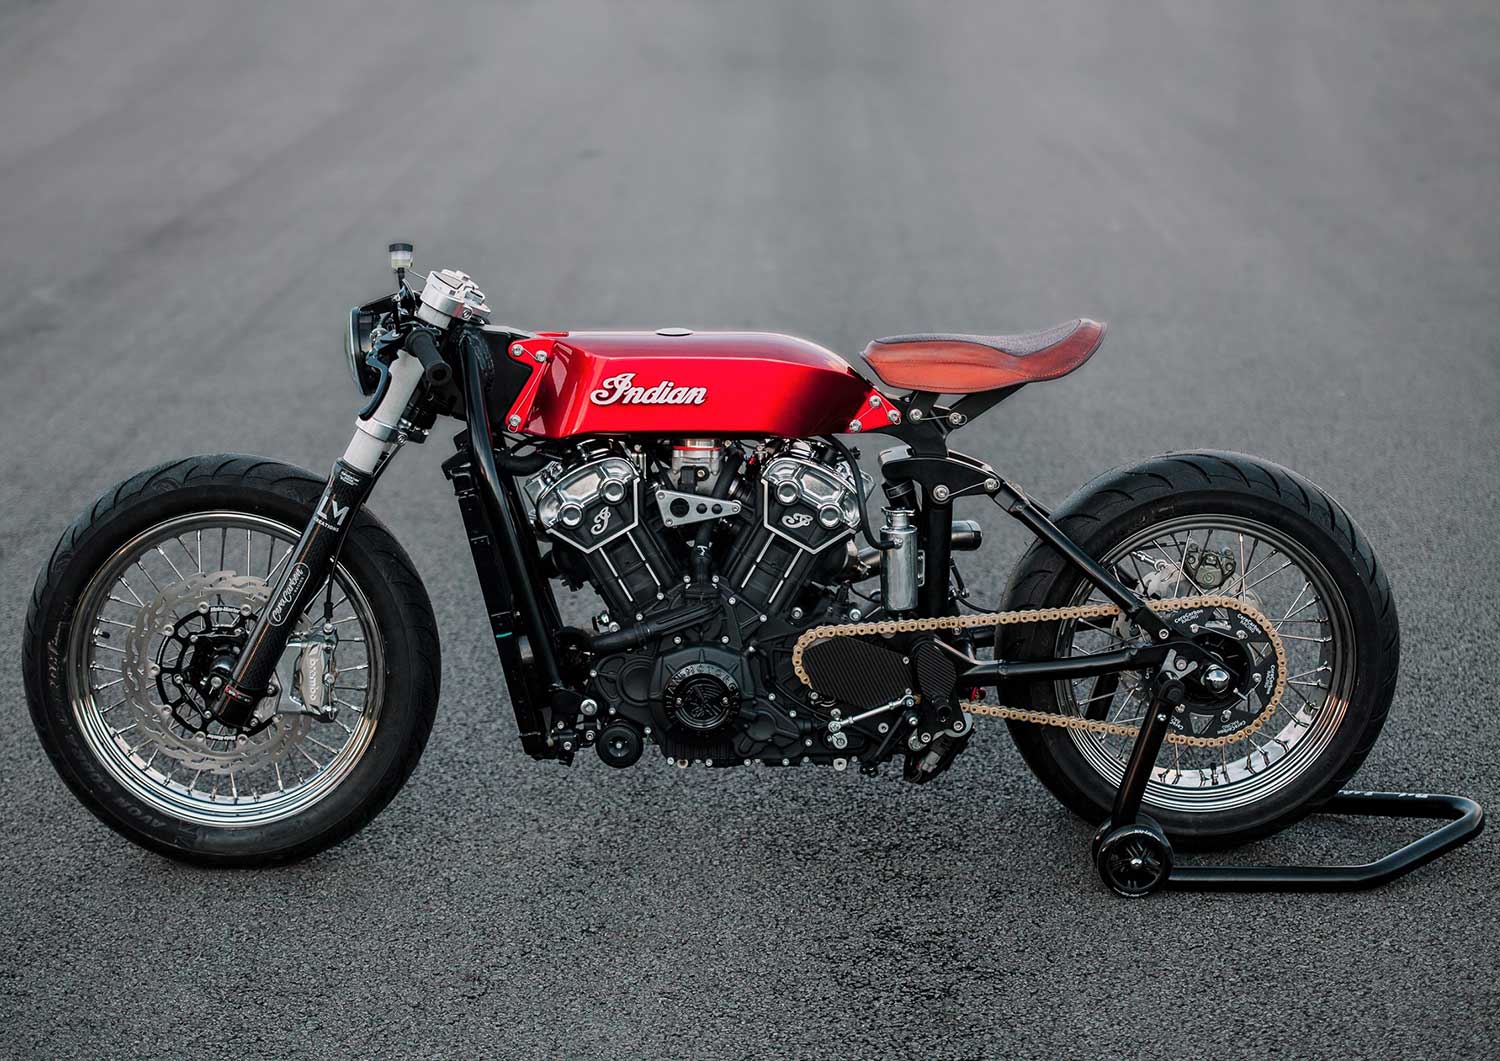 Luuc Muis of LM Creations says he explored Indian’s early racing success to develop the custom bike’s visual design, and then worked to integrate modern components and materials.